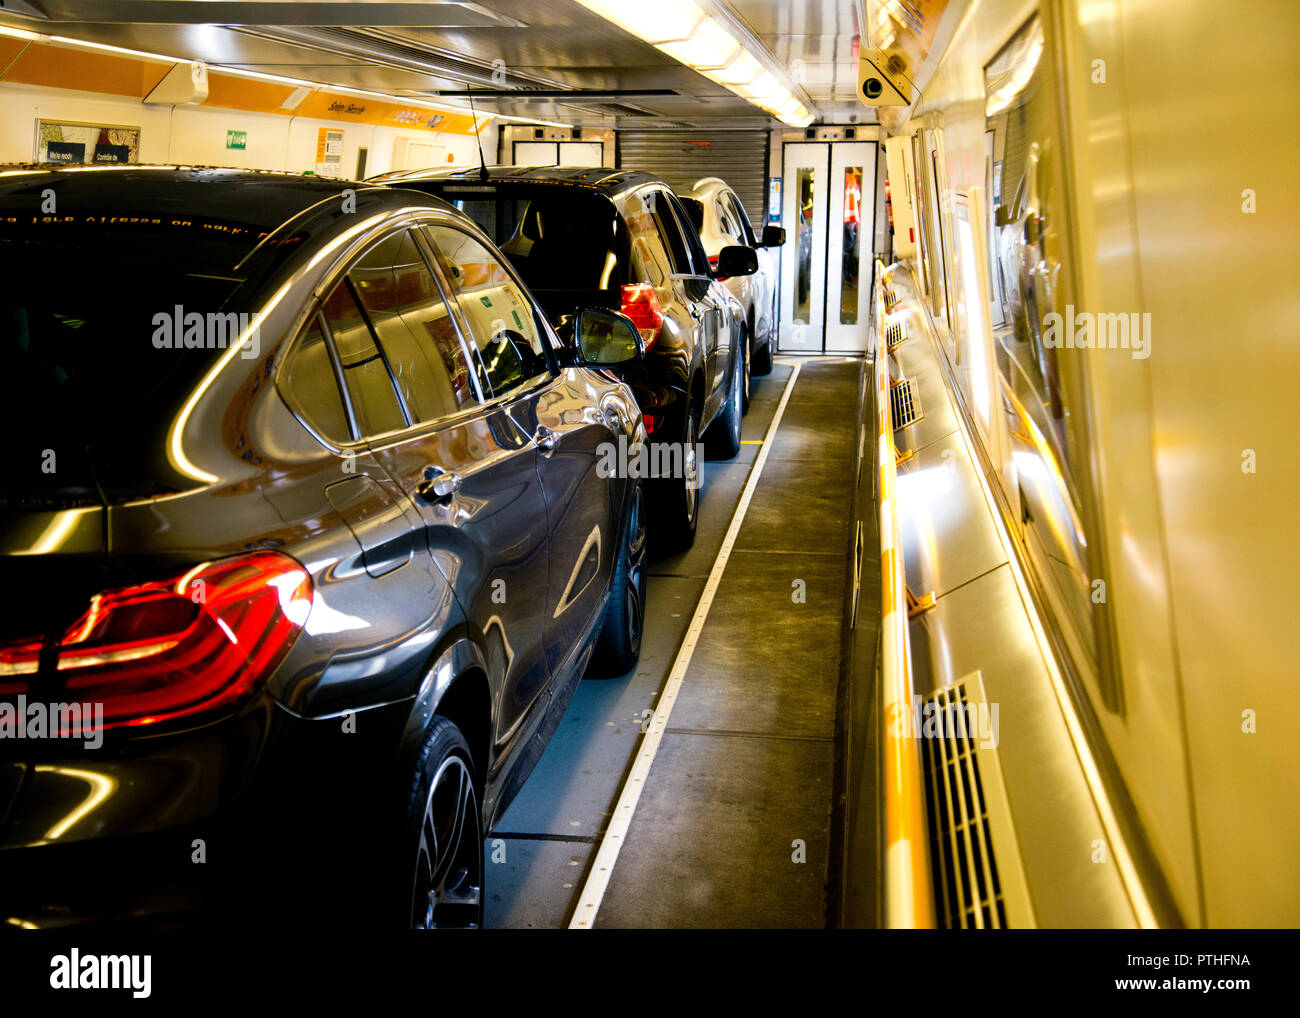 View from inside of a shuttle carriage which transports passenger vehicles through the channel tunnel. Stock Photo